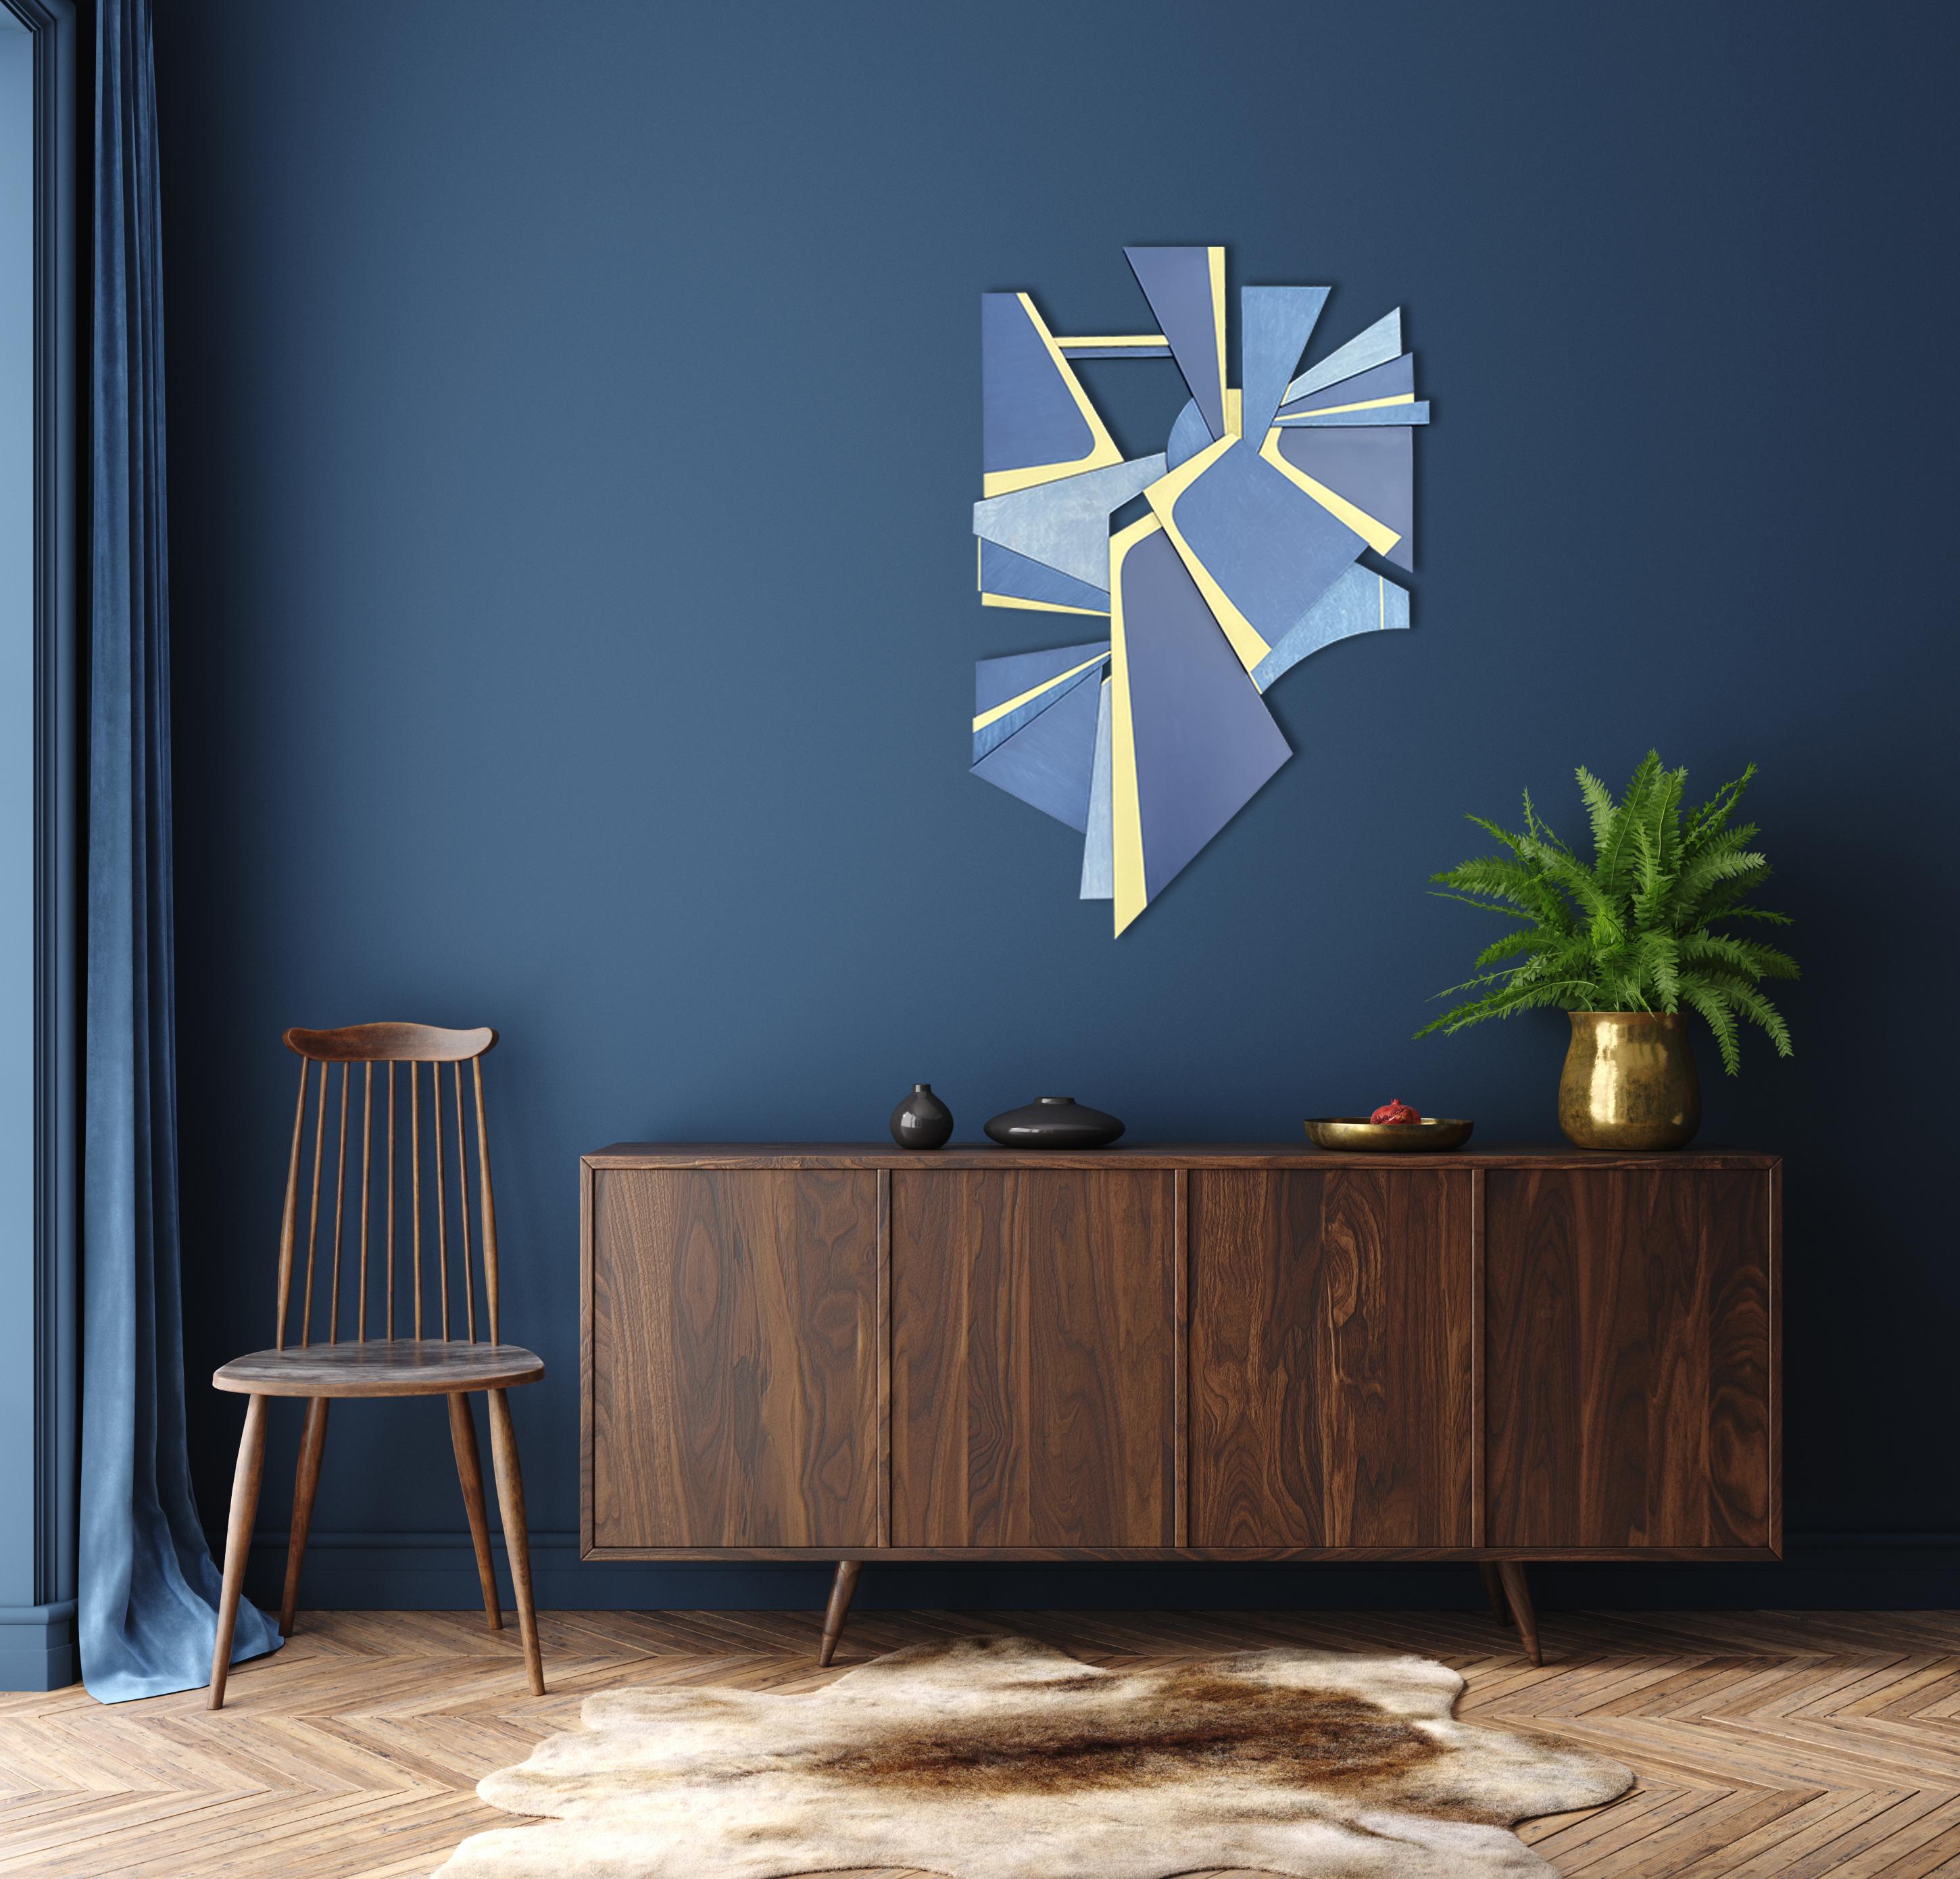 NOTE: This is a commission piece, made after the original.  It can be commissioned in custom sizes.  Allow 3-4 weeks plus shipping.

Modulus is a striking mid century modern inspired wall sculpture made from birch, maple, mdf, metallic bronze enamel